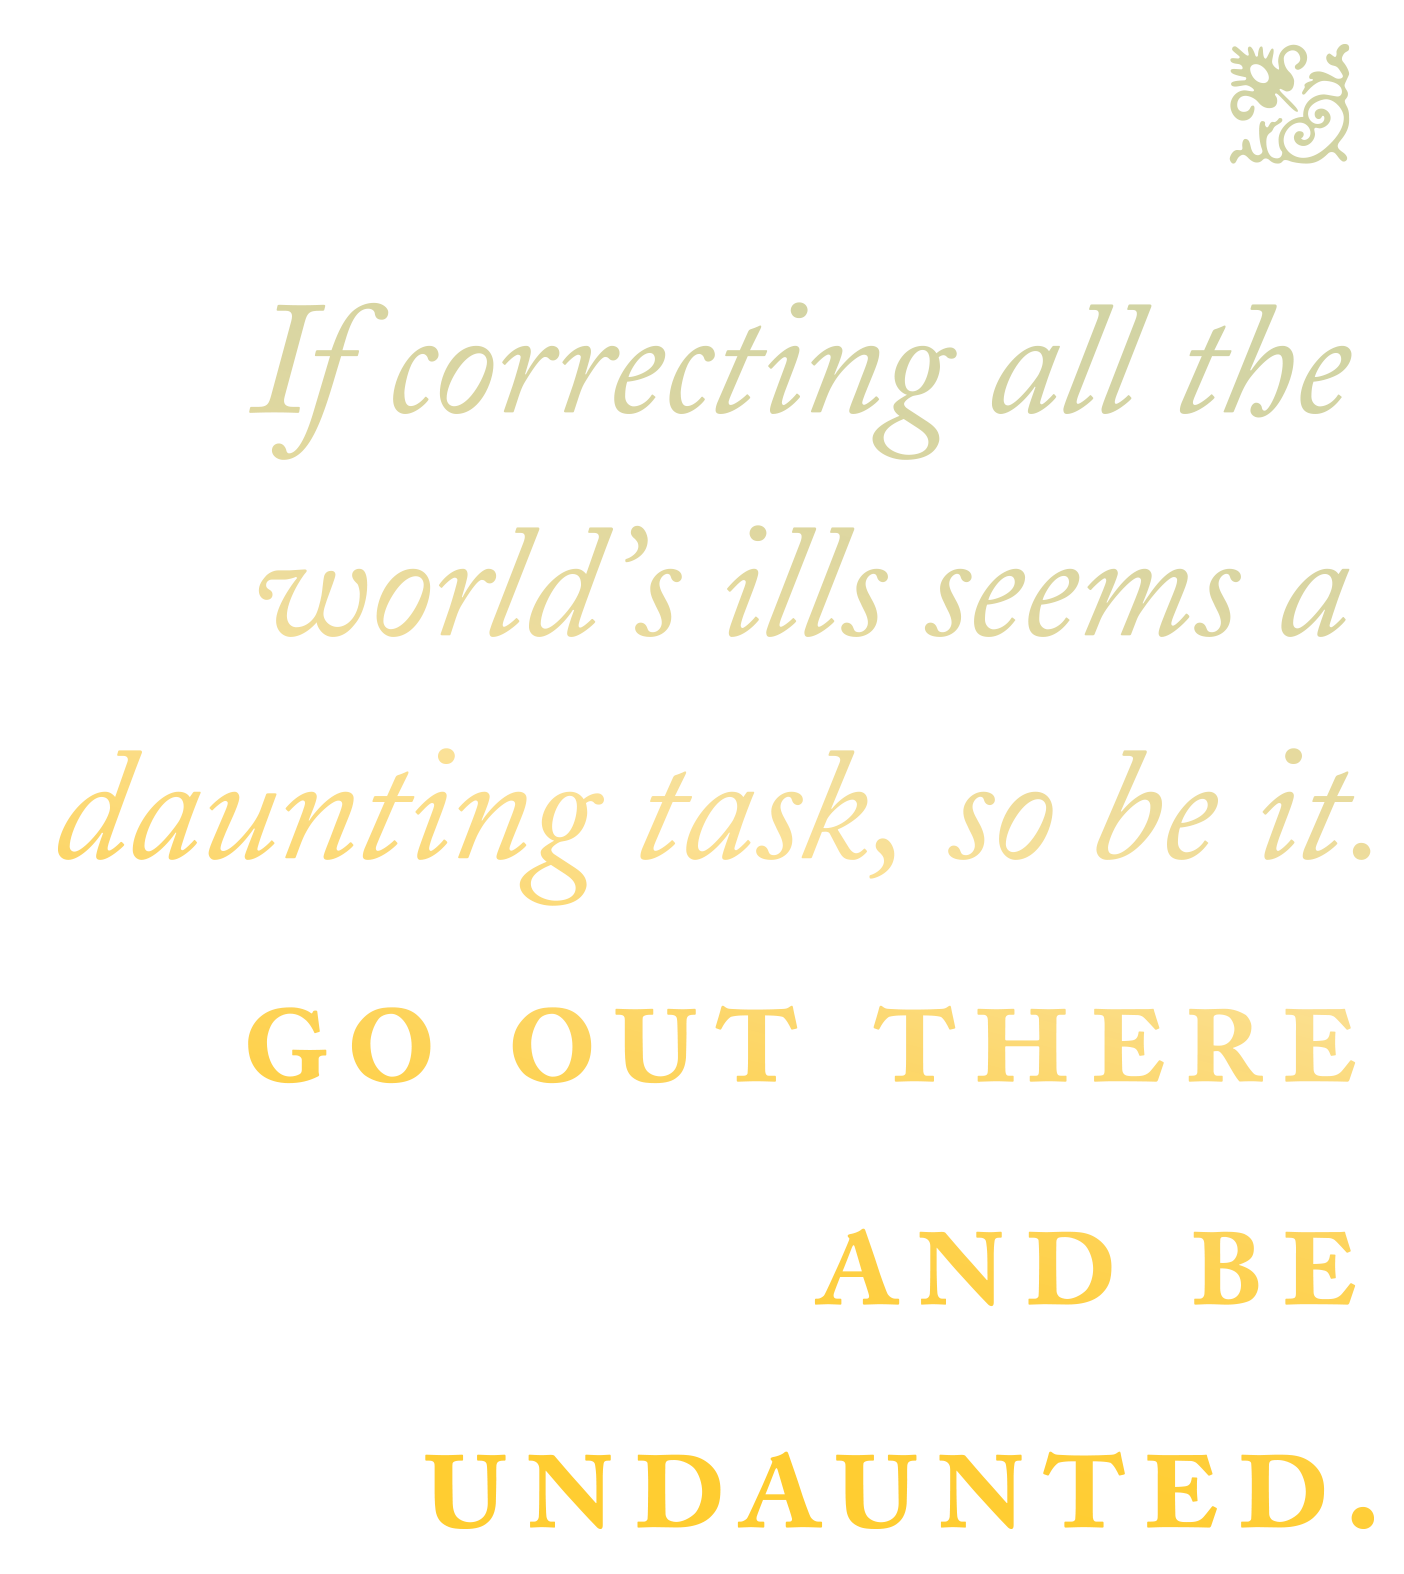 A pull quote that reads: "If correcting all the world's ills seems a daunting task, so be it. Go out there and be undaunted."